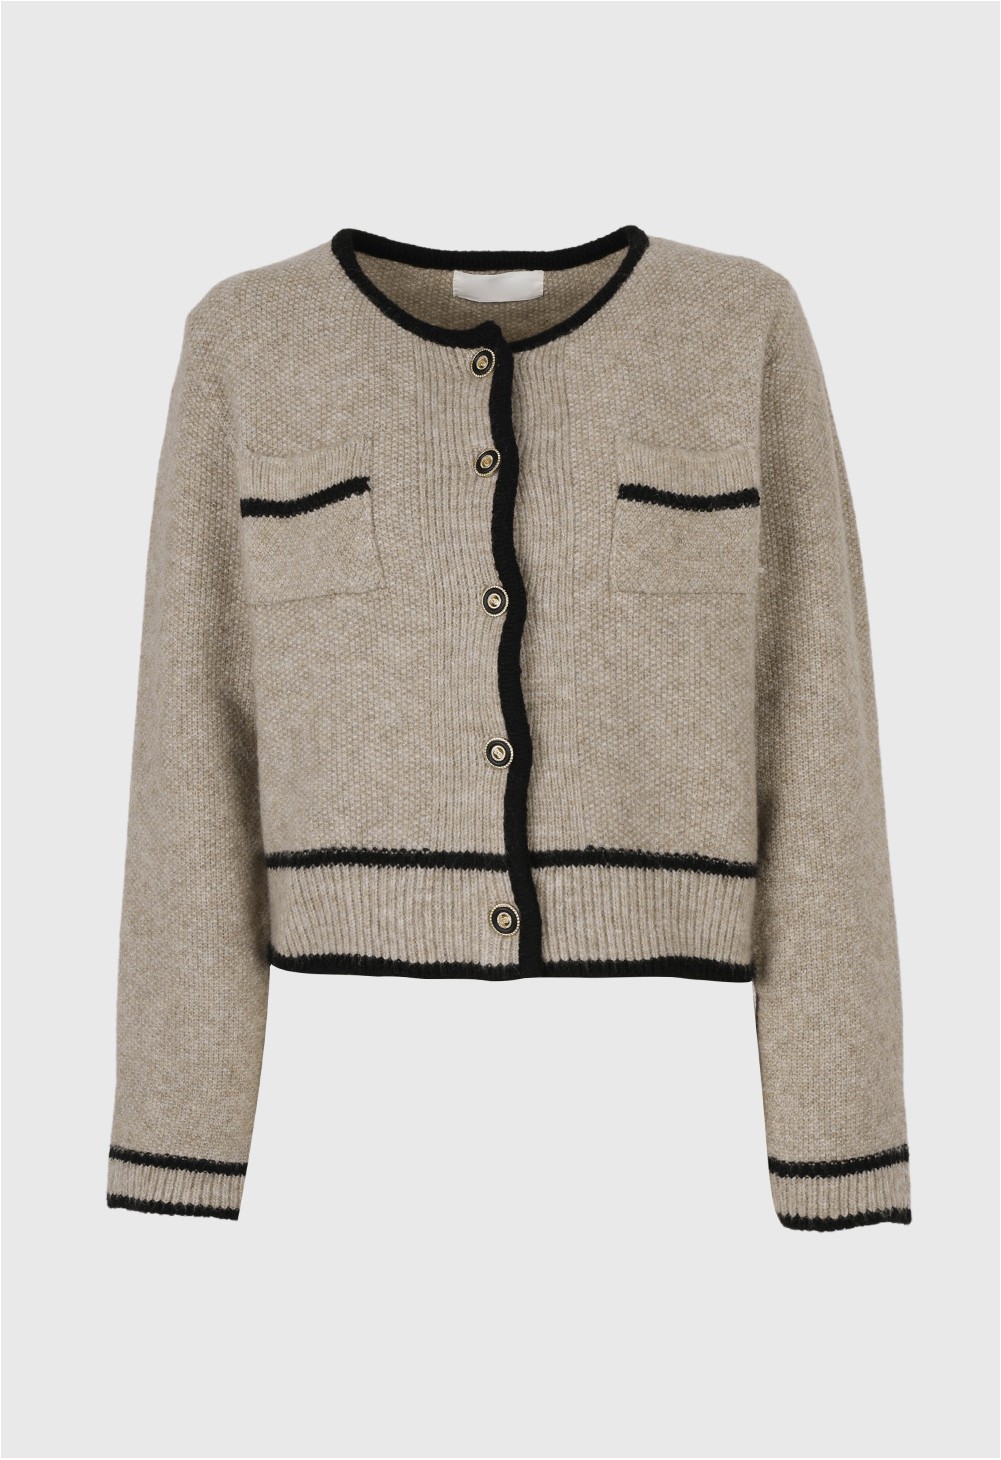 Benito Road Coloration Cardigan | Cardigans for Women | KOODING